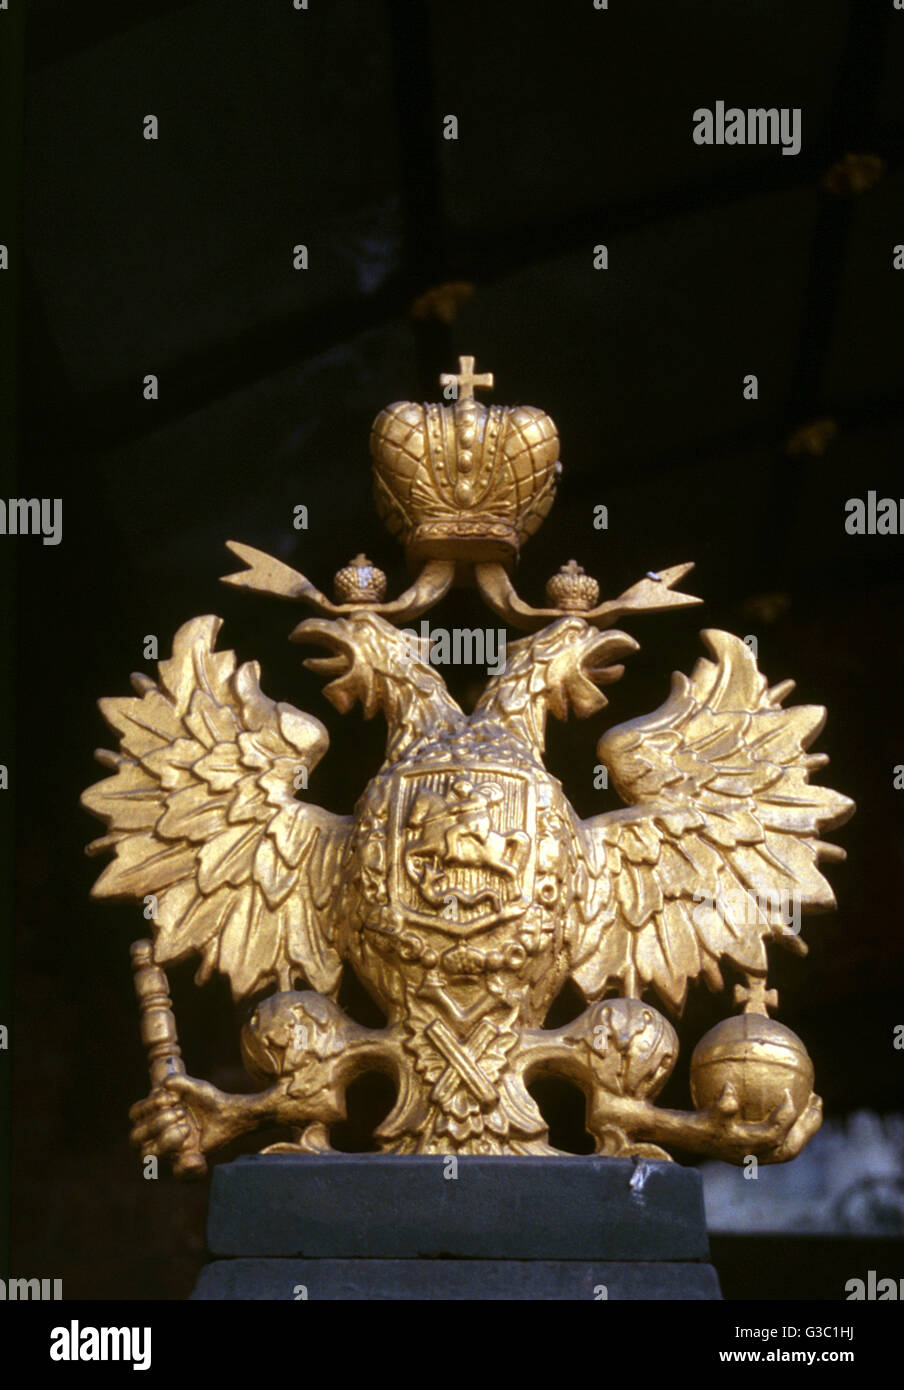 Romanov insignia, Peter the Great's cabin, St Petersburg Stock Photo